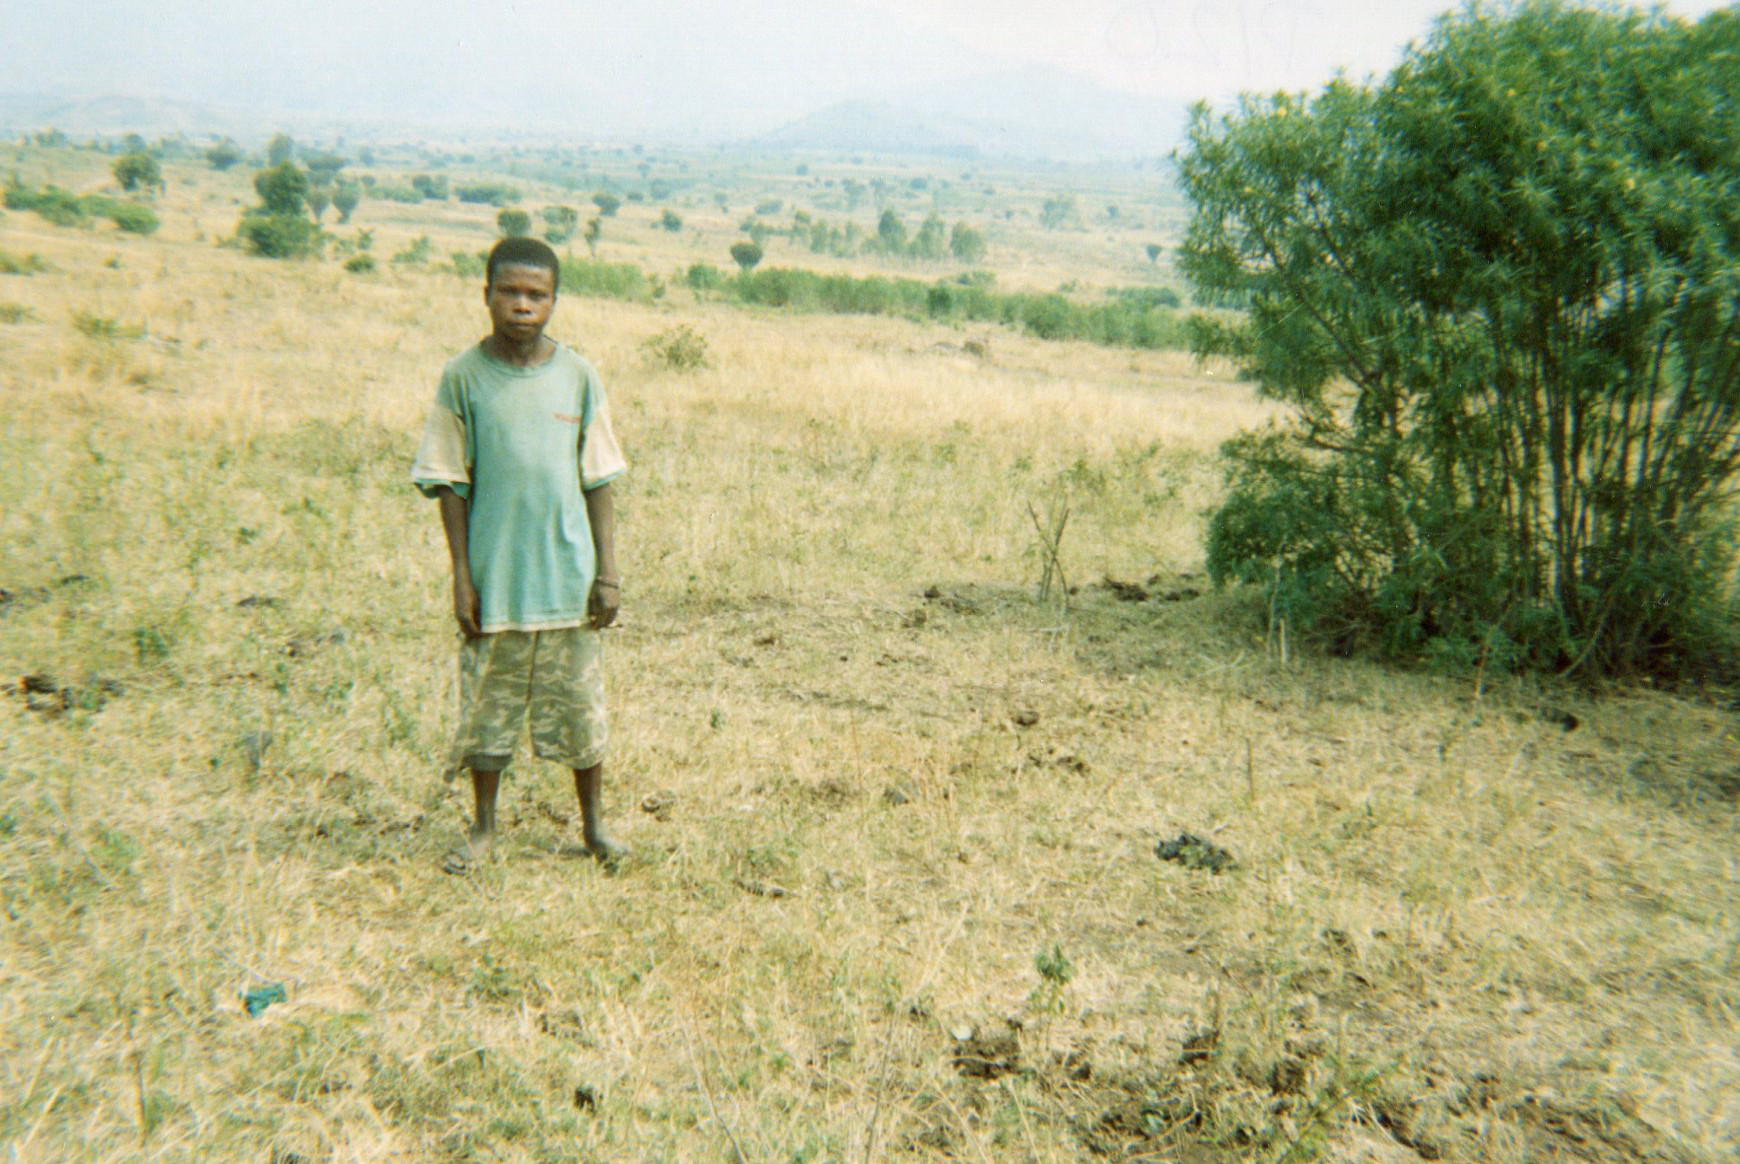  This photo shows how children who have left armed groups become isolated from their communities and how after their liberation they are often left without support. &nbsp;  